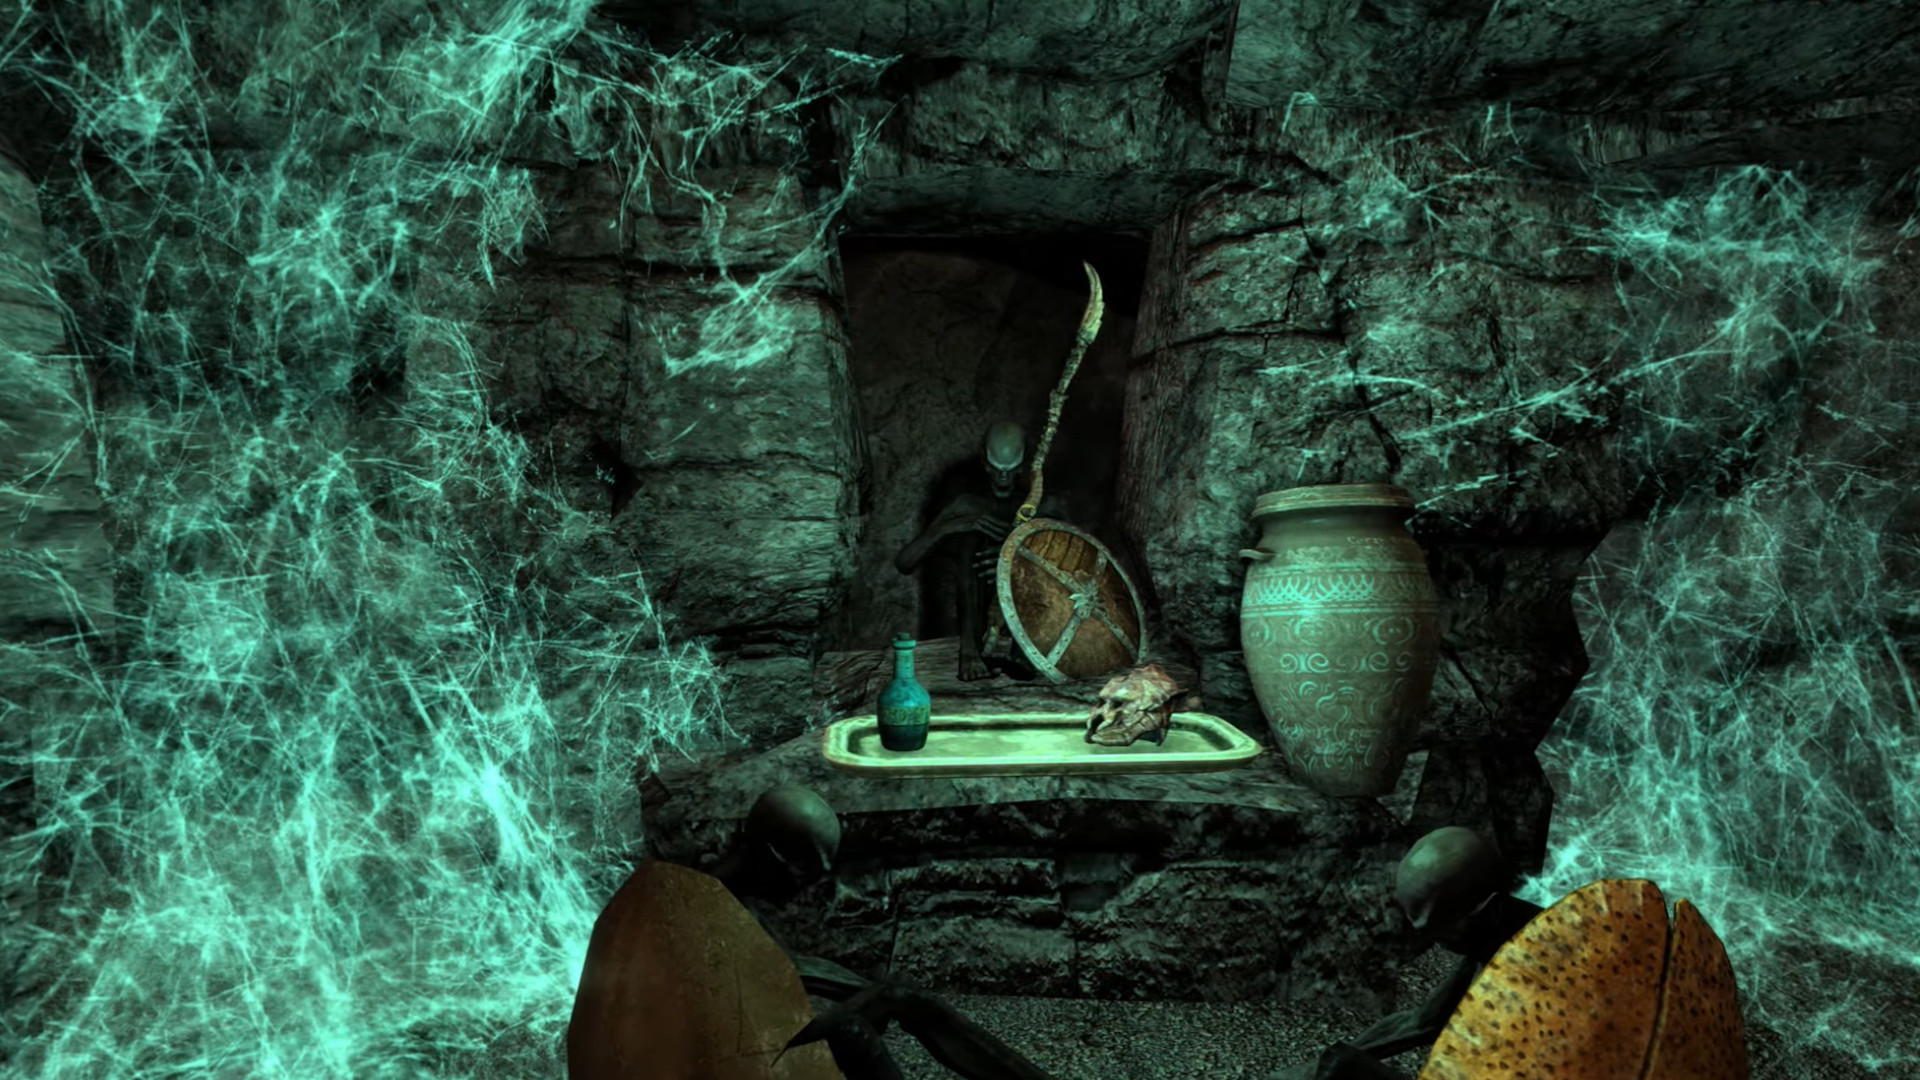 Skyrim-with-Morrowind mod Skywind still looks incredible, and still sounds a long way off